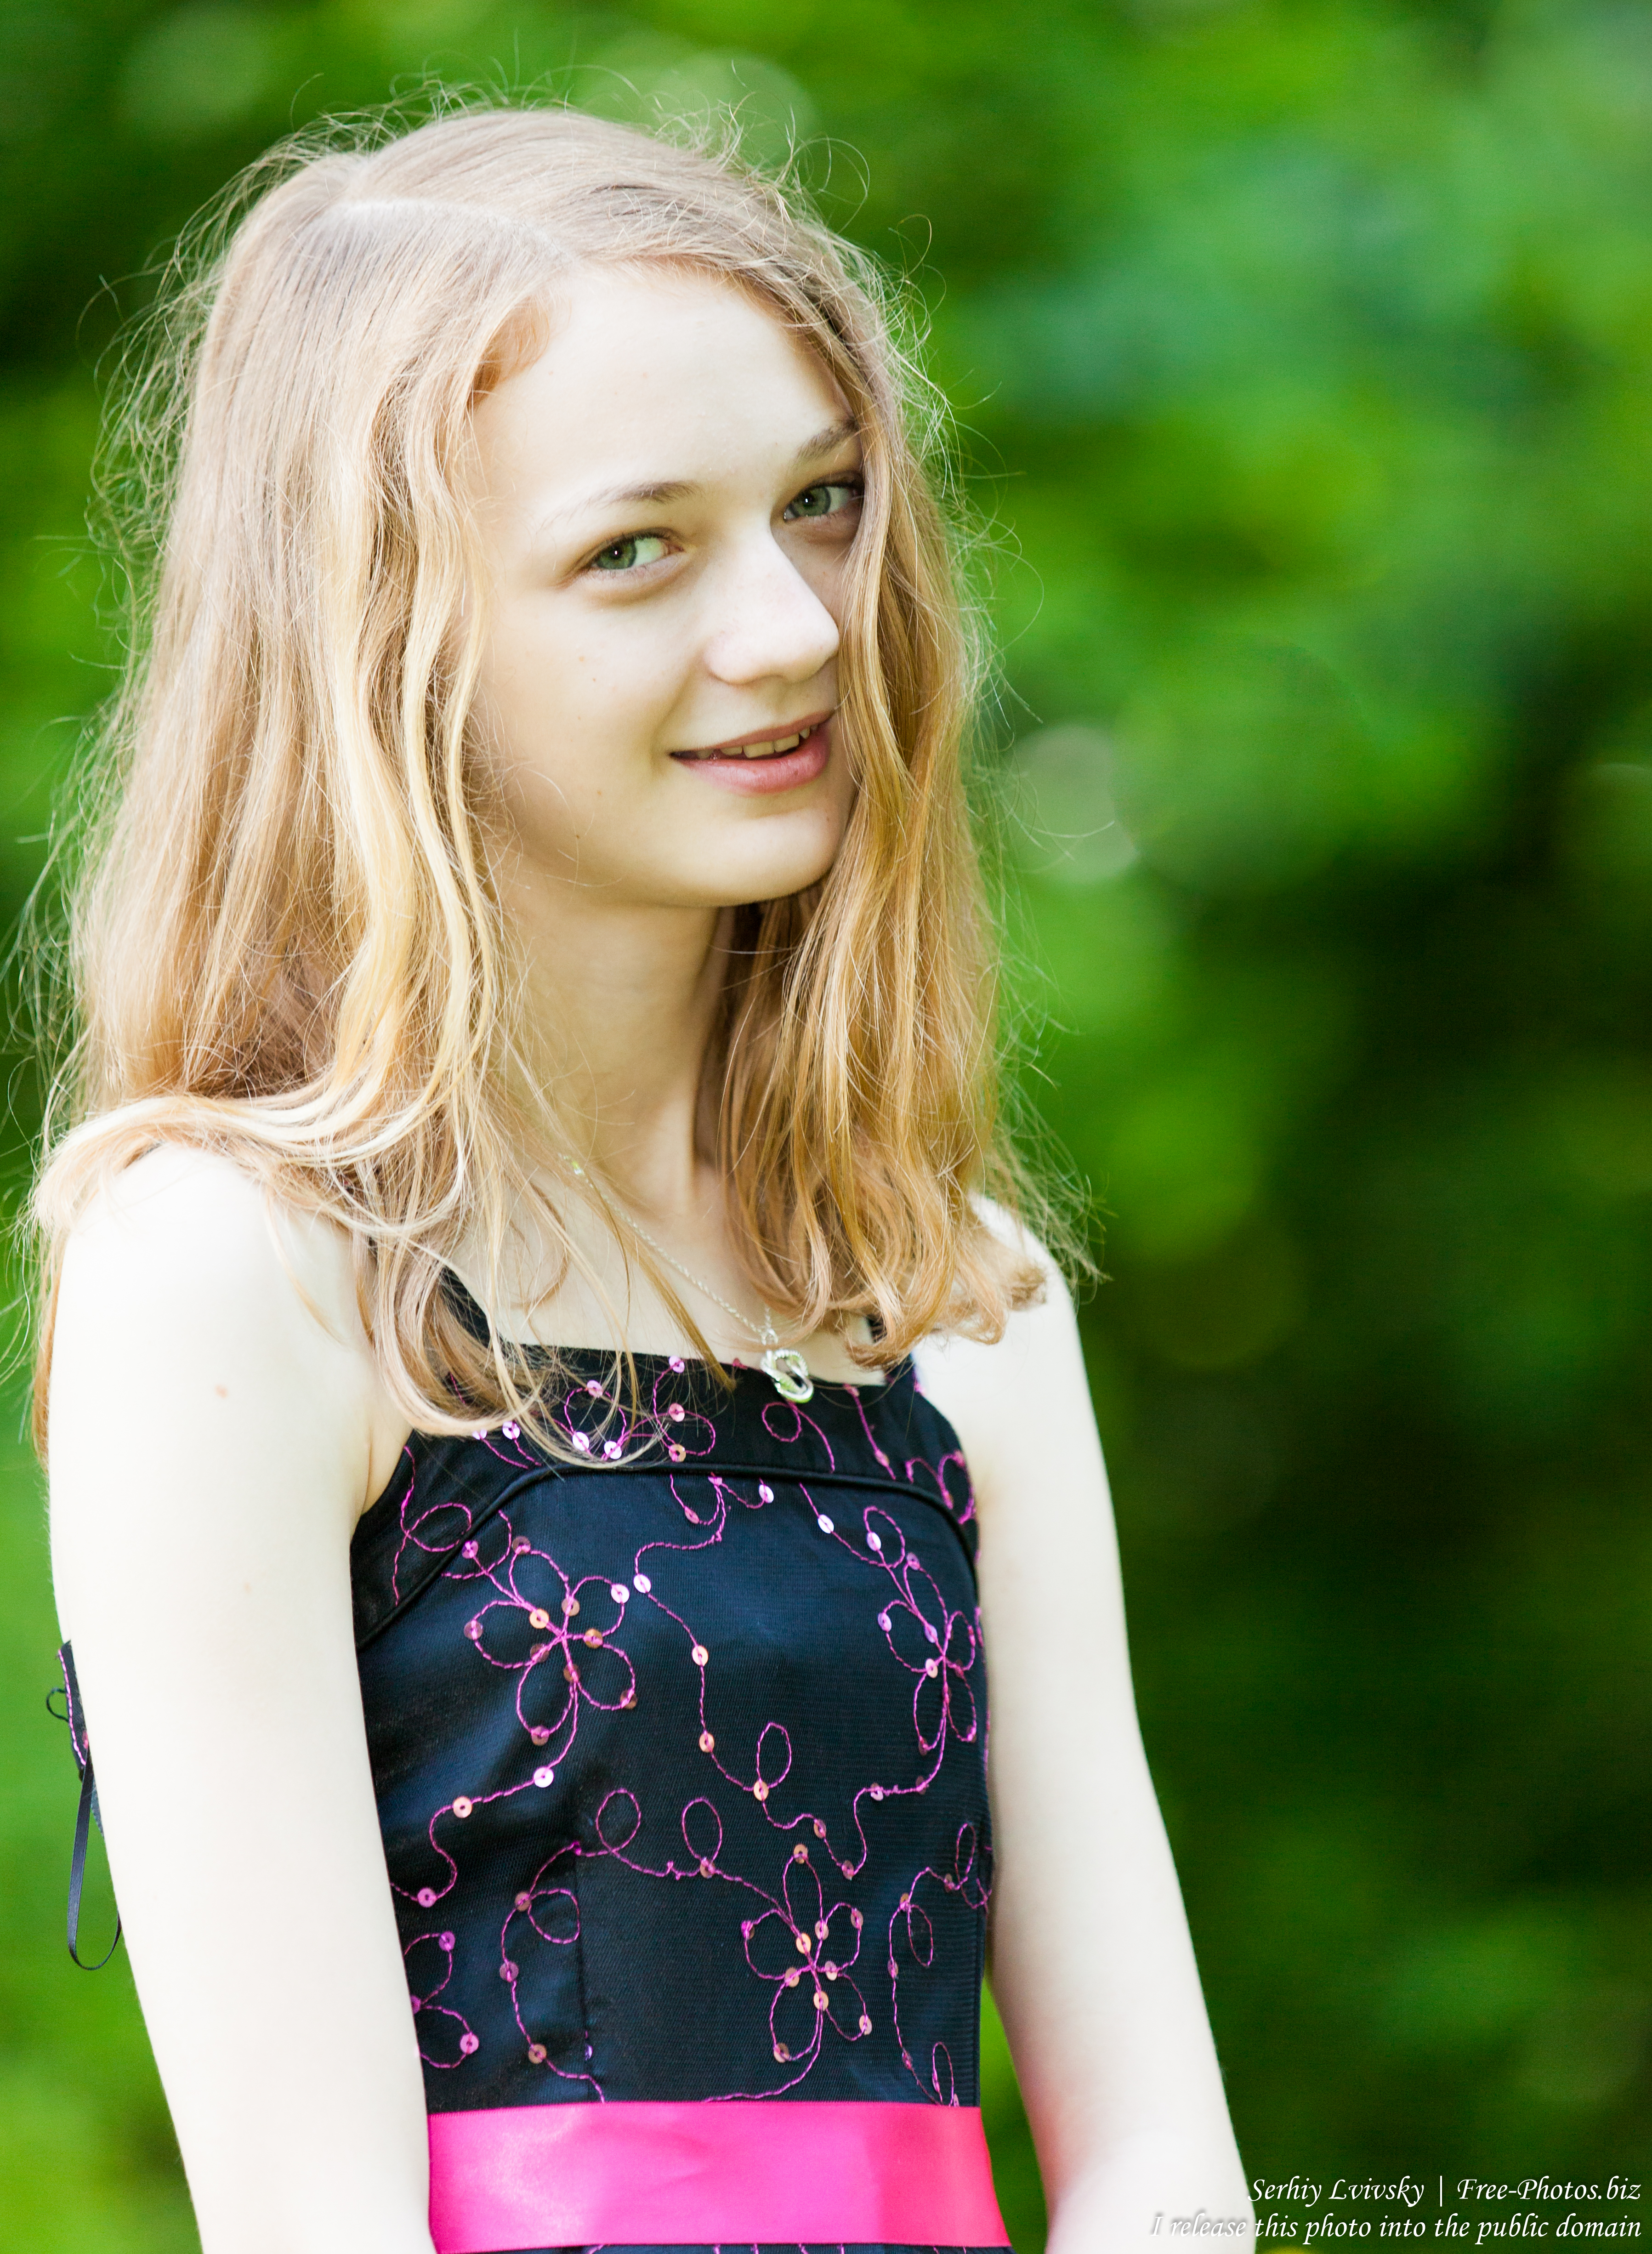 a 14-year-old blond girl photographed in June 2015, portrait 2/2